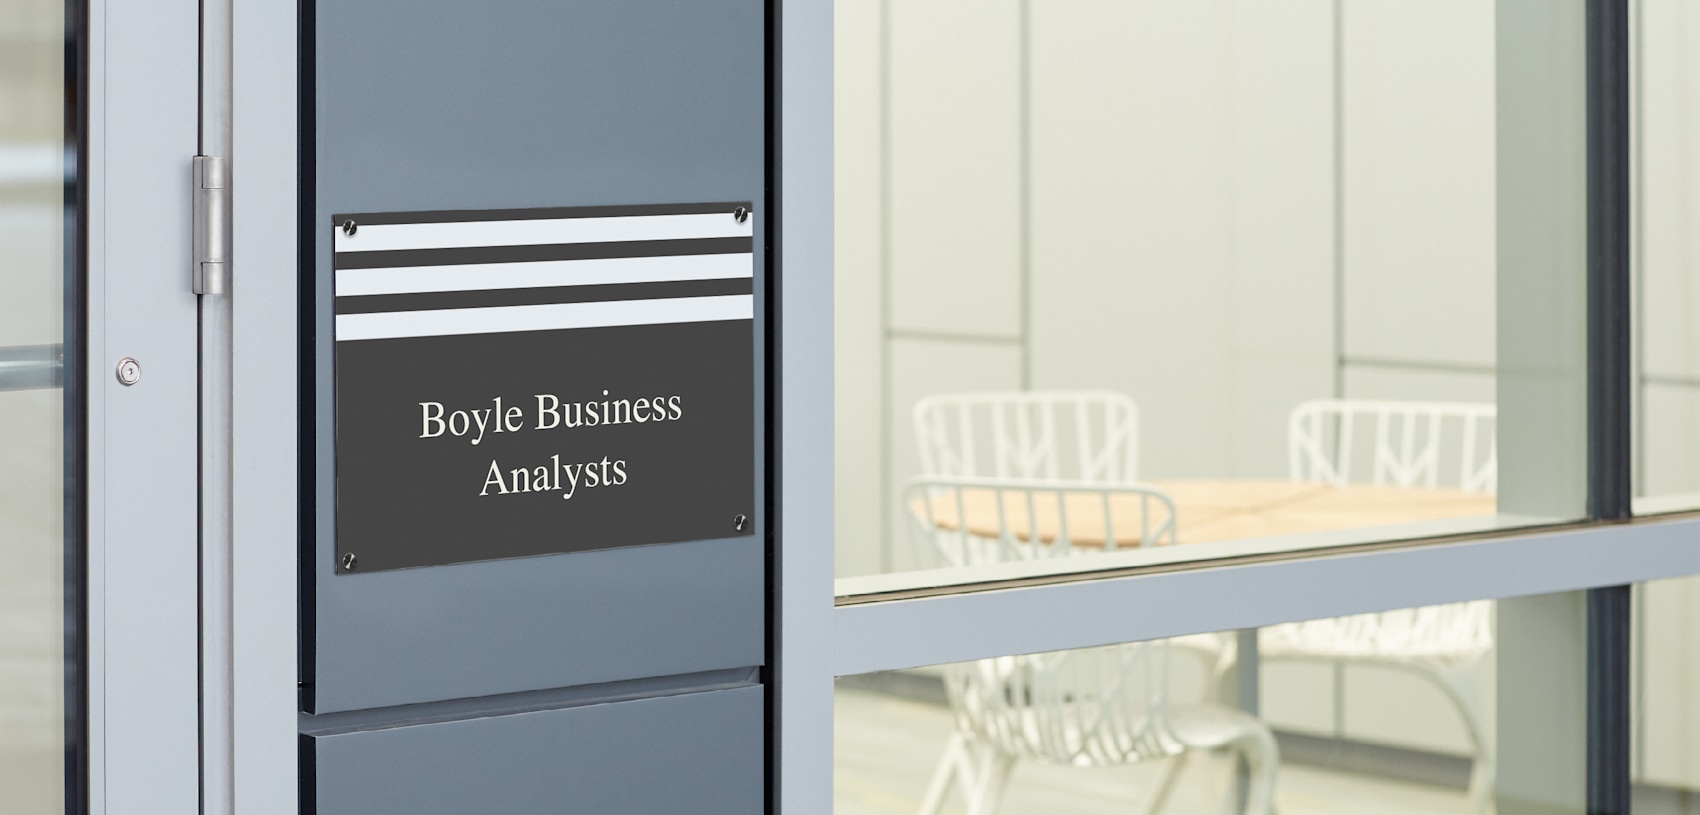 Larger version: metal sign printing for business analysts